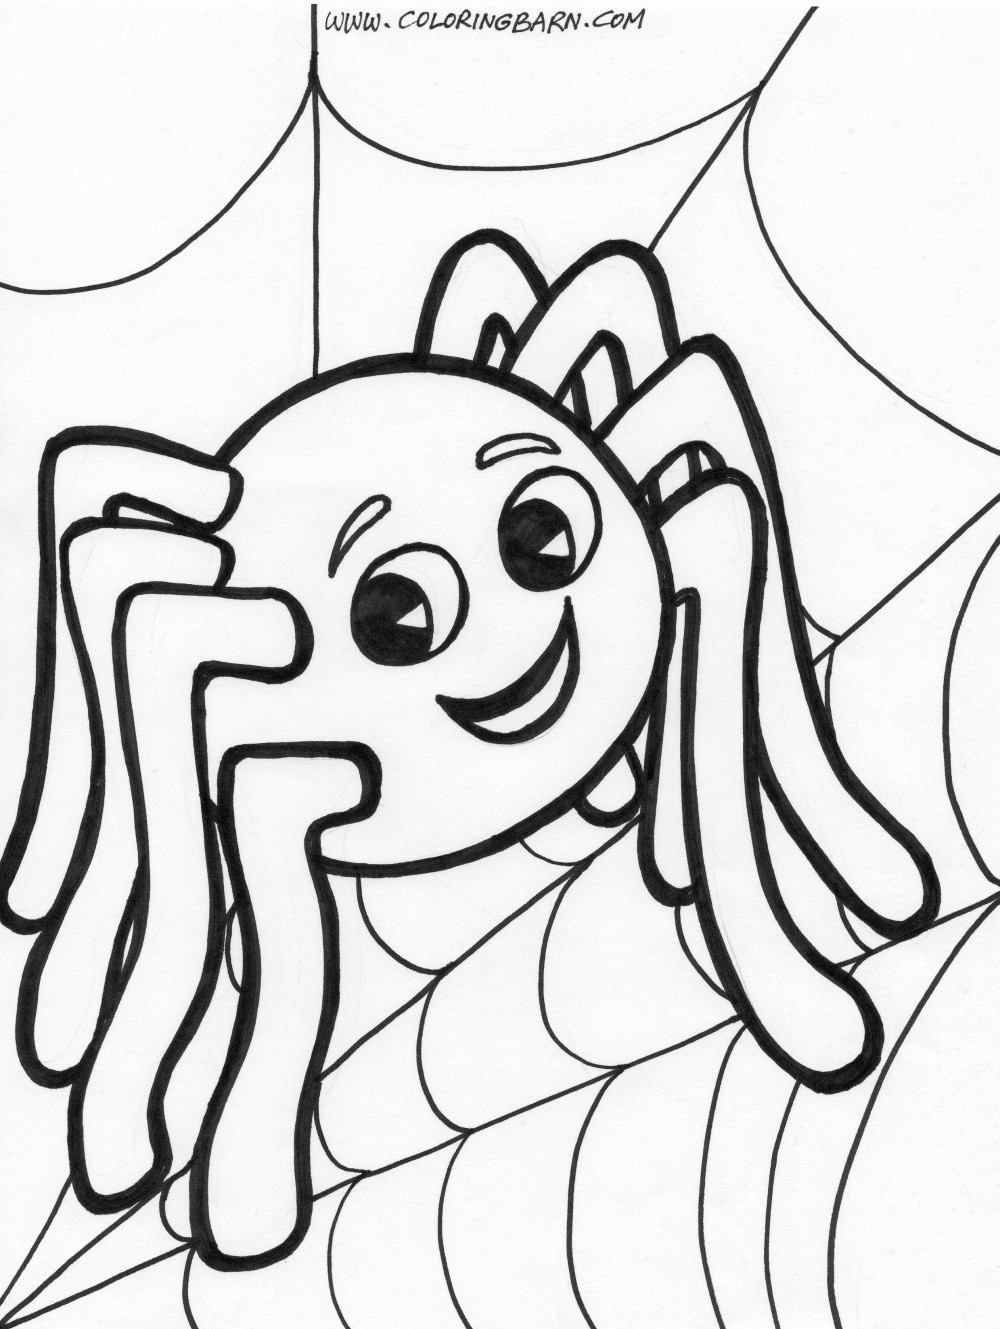 Fall Coloring Pages For Preschoolers Free at GetColorings.com | Free